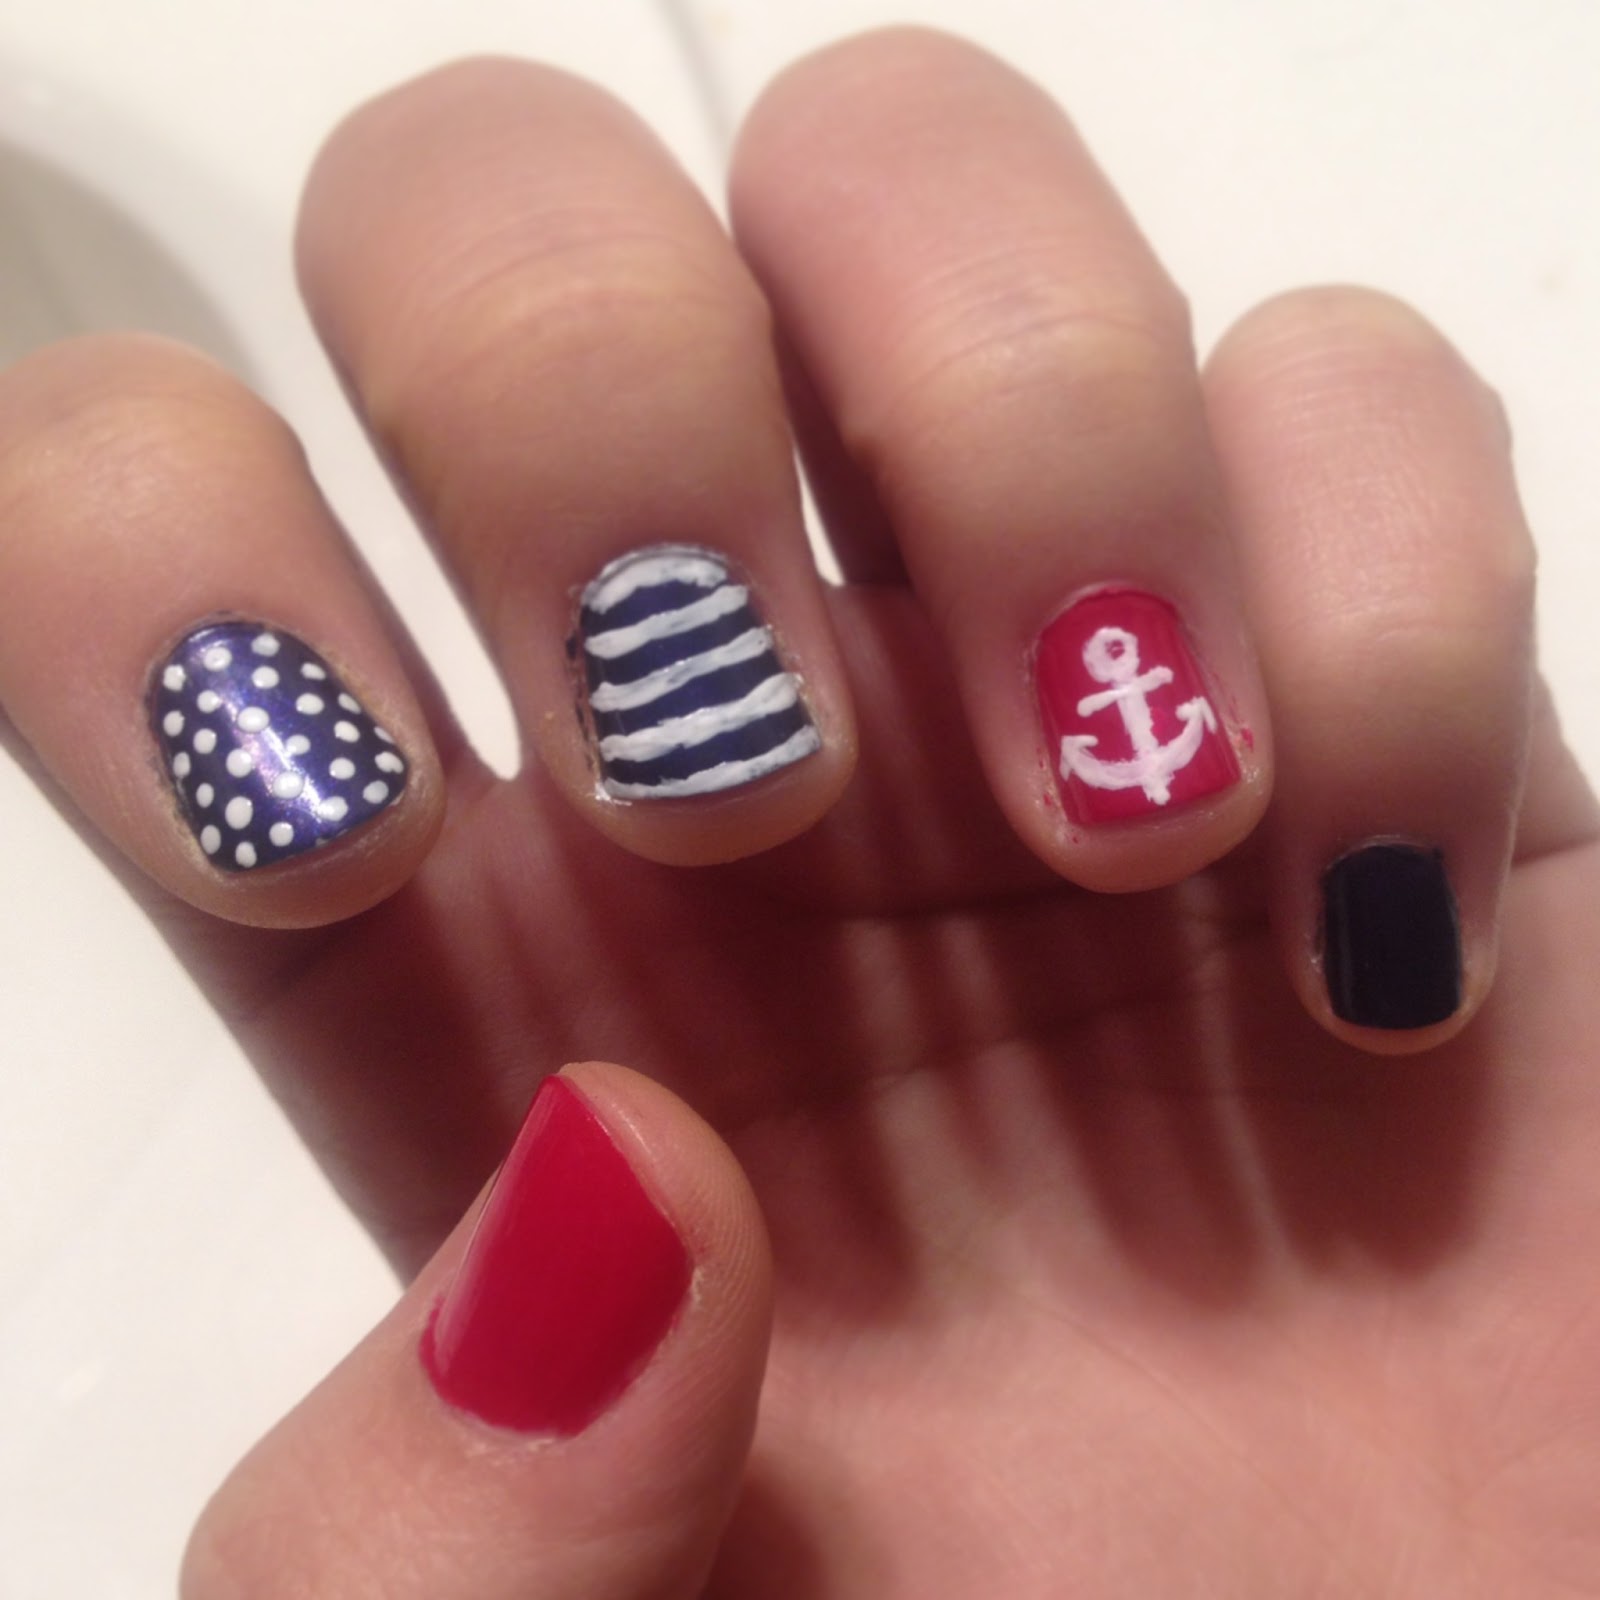 Chasing Lovely: Nail Art For Newbies